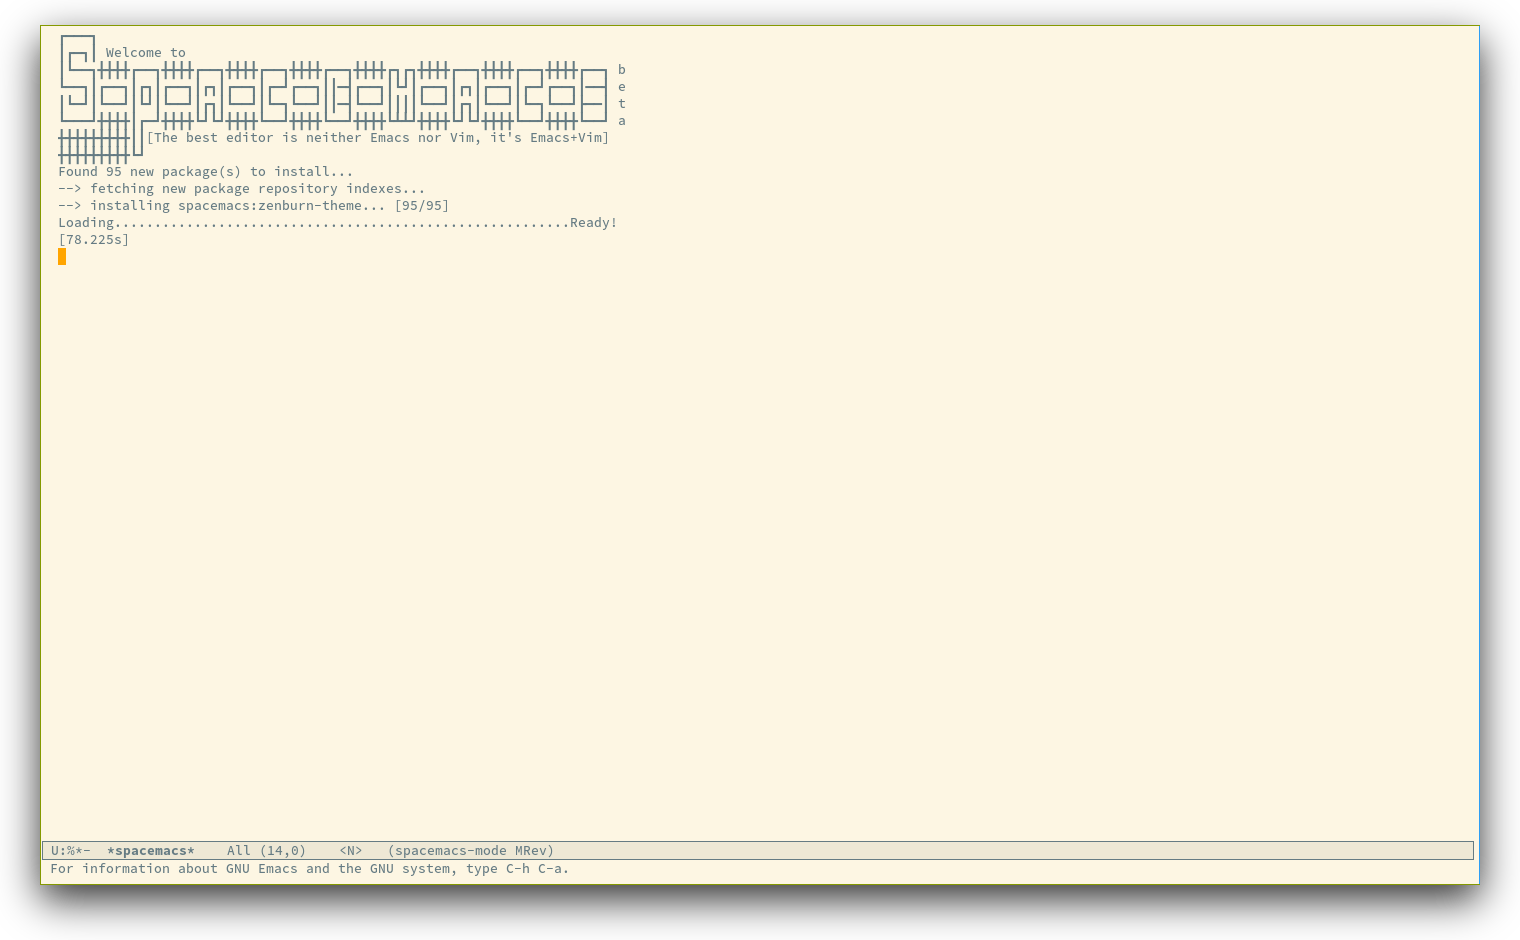 /TakeV/spacemacs/media/commit/be817362aeb84983349ff72ca78ab90a34cc5e6e/doc/img/spacemacs-startup.png